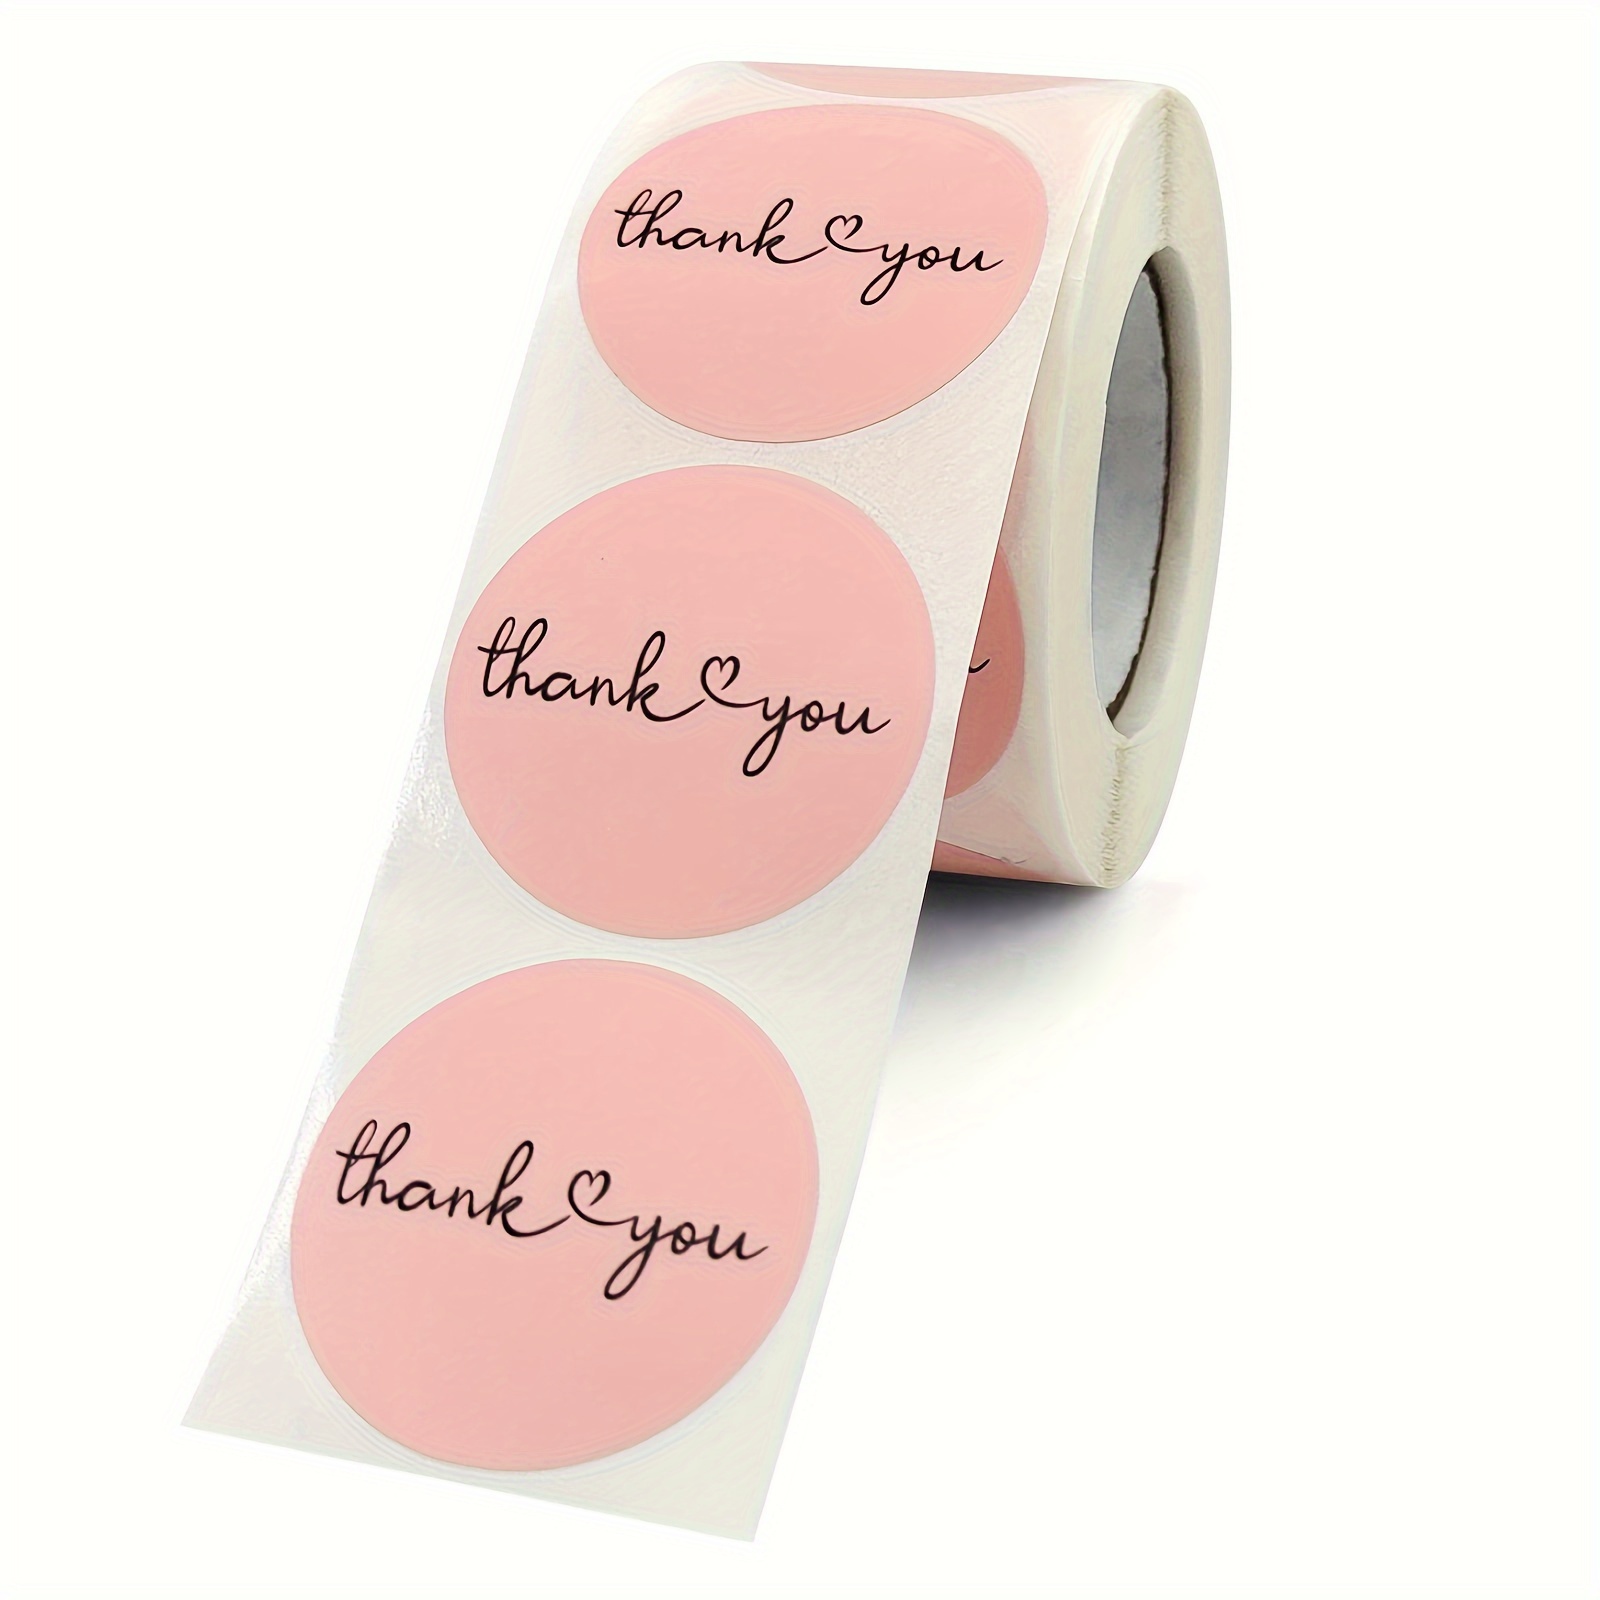 

500pcs, 1.5 Inch Thank You Stickers, Pink Sealing Stickers Thank You Label Tags For Giveaways, Envelope Seals, Small Business, Wedding, Party Gift Wrap Bag, Packaging